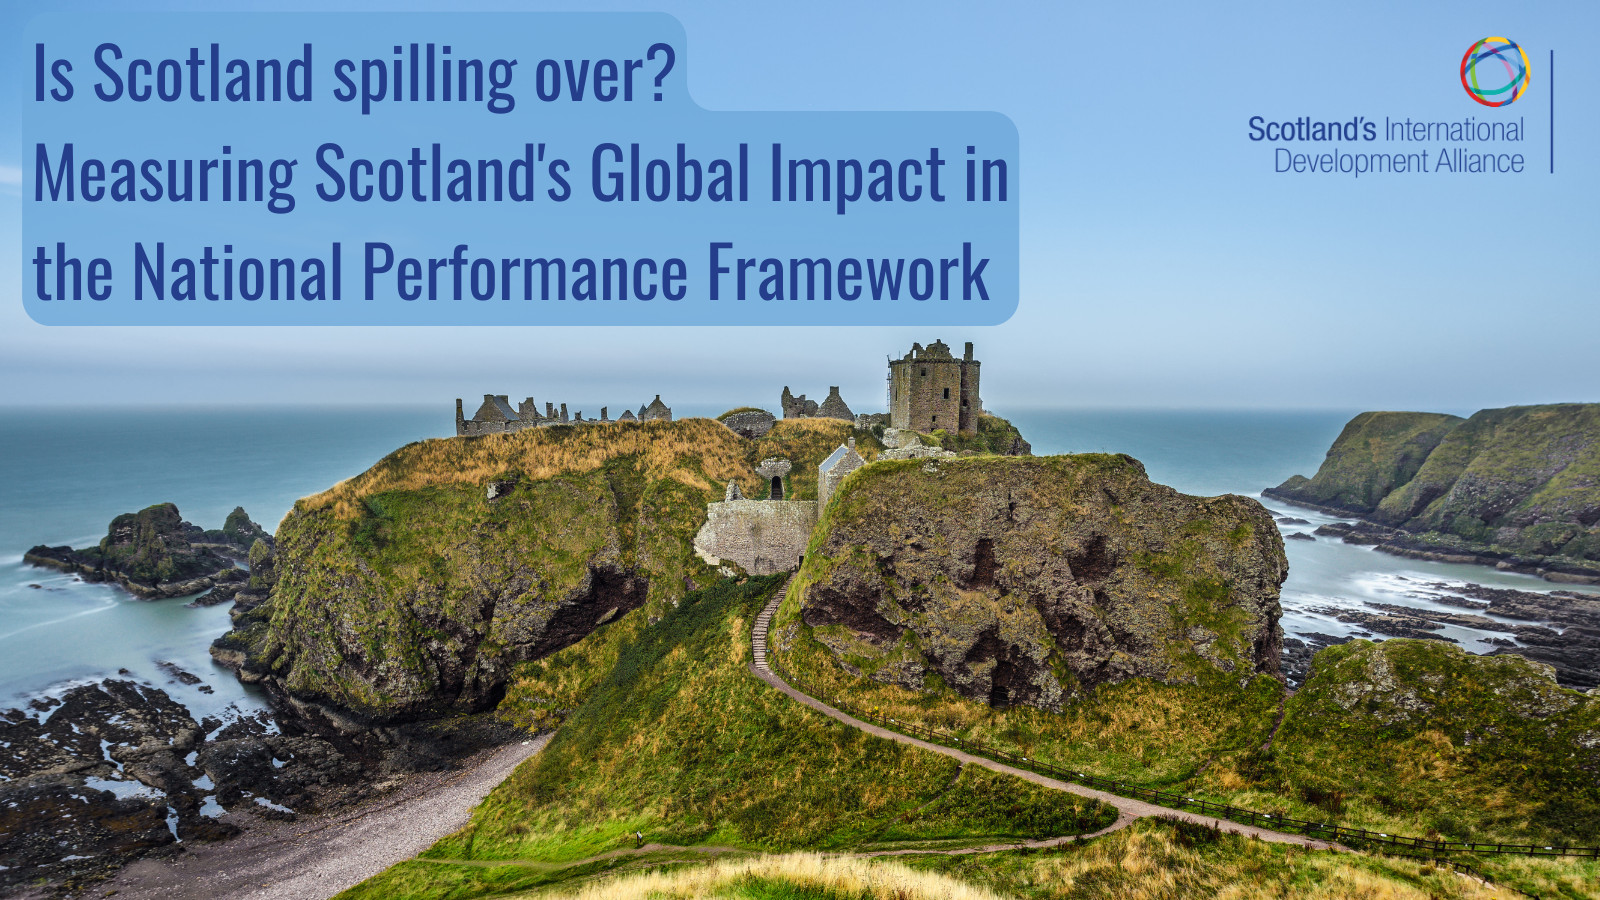 Measuring Scotland’s Global Impact in the National Performance Framework